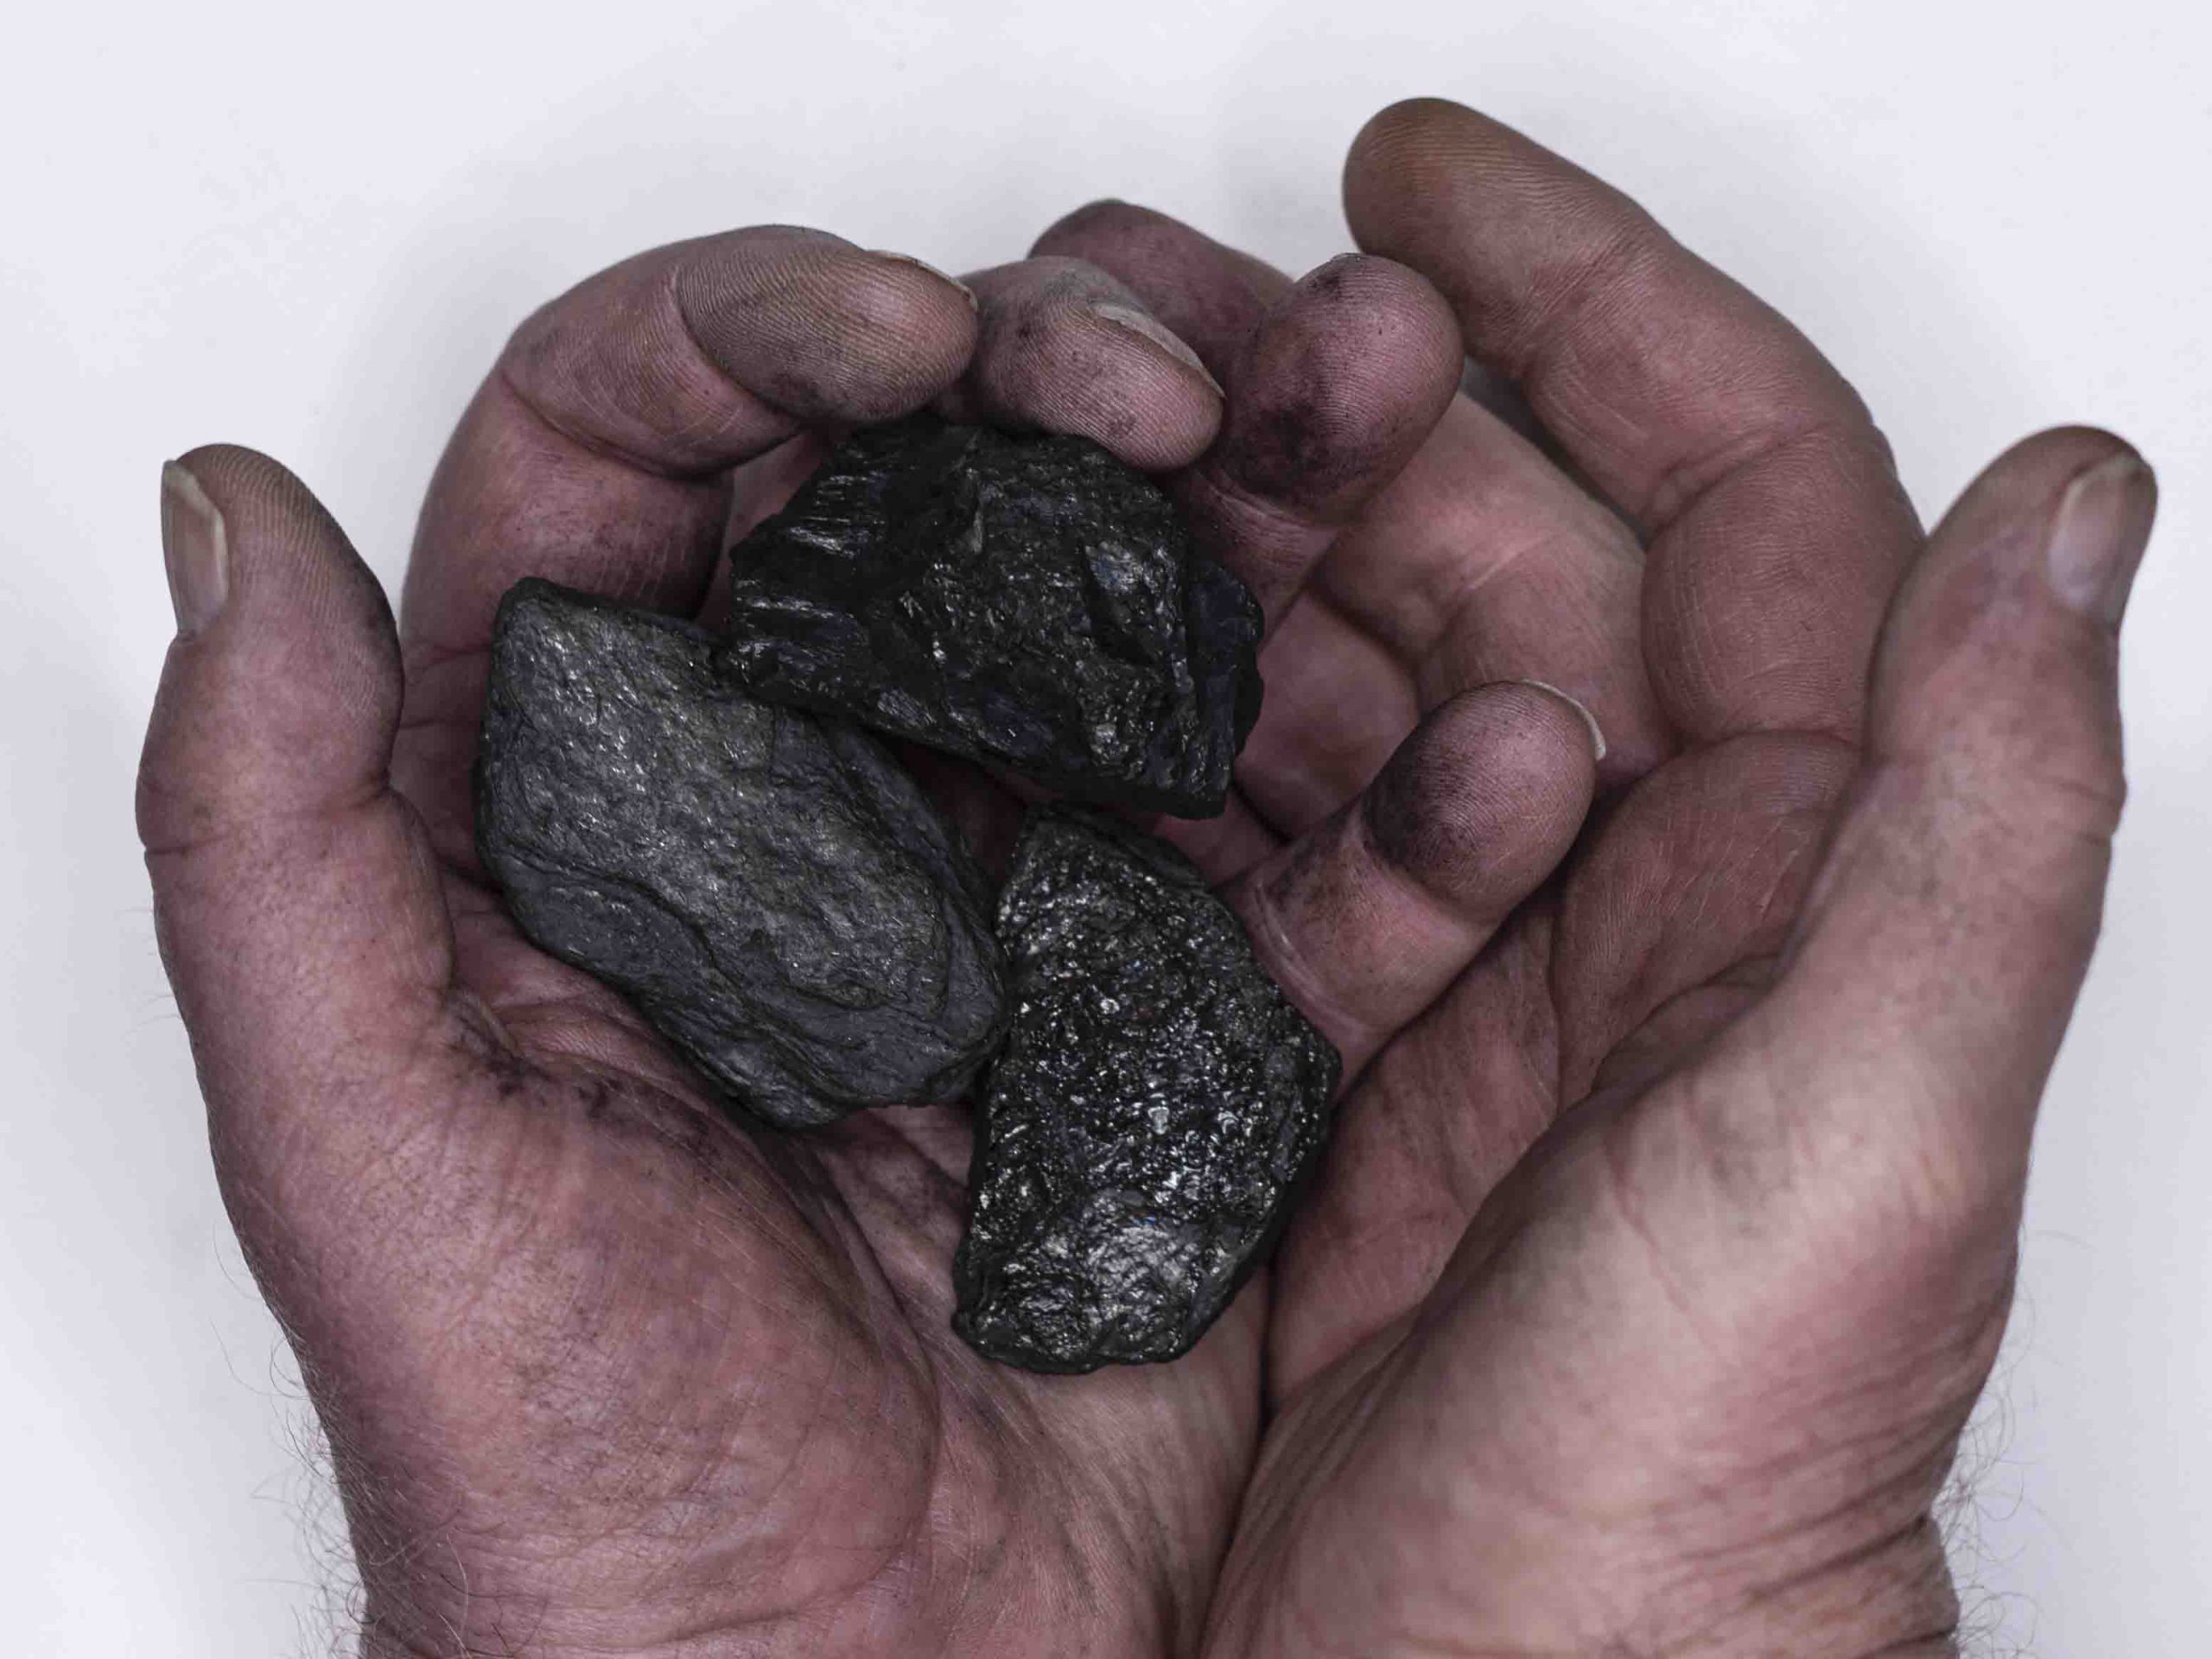 Bruce Forbes, "Coal" Digital photography, 2024